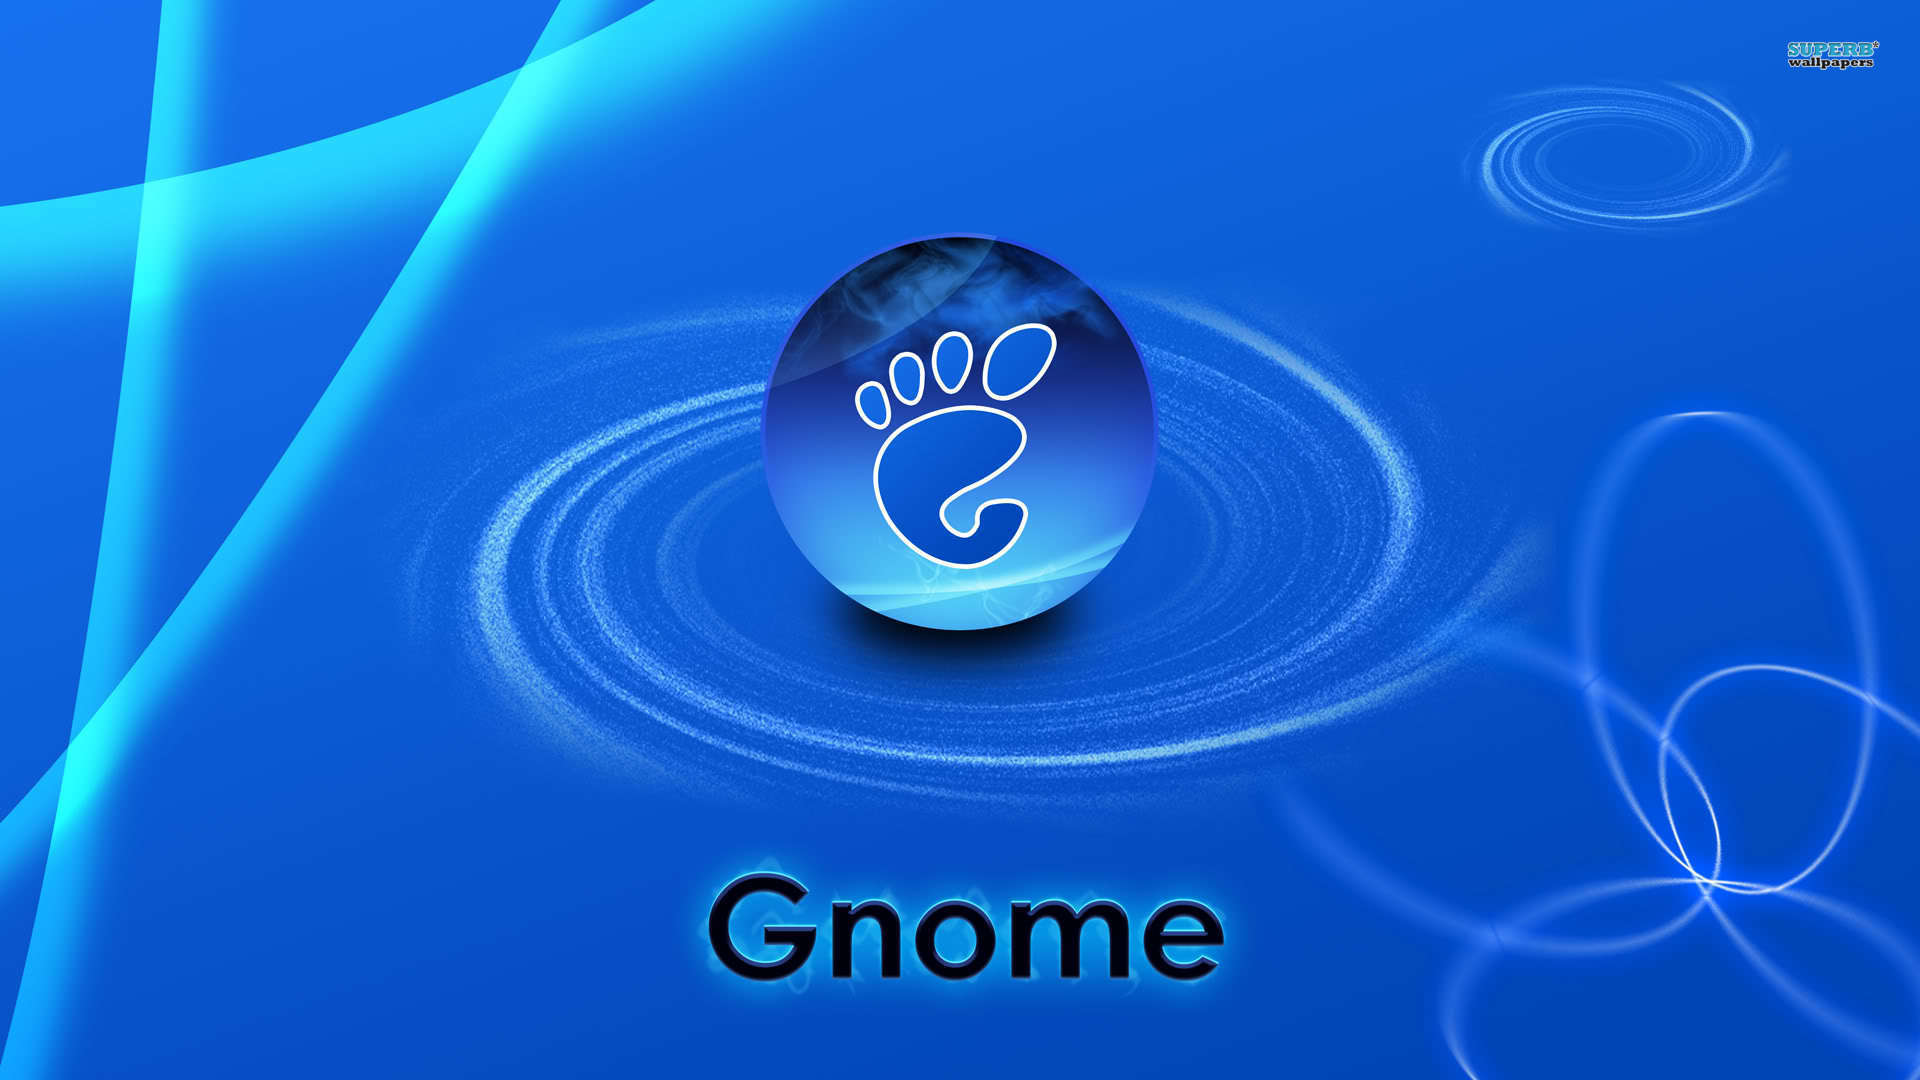 Gnome wallpaper - Computer wallpapers - #6468